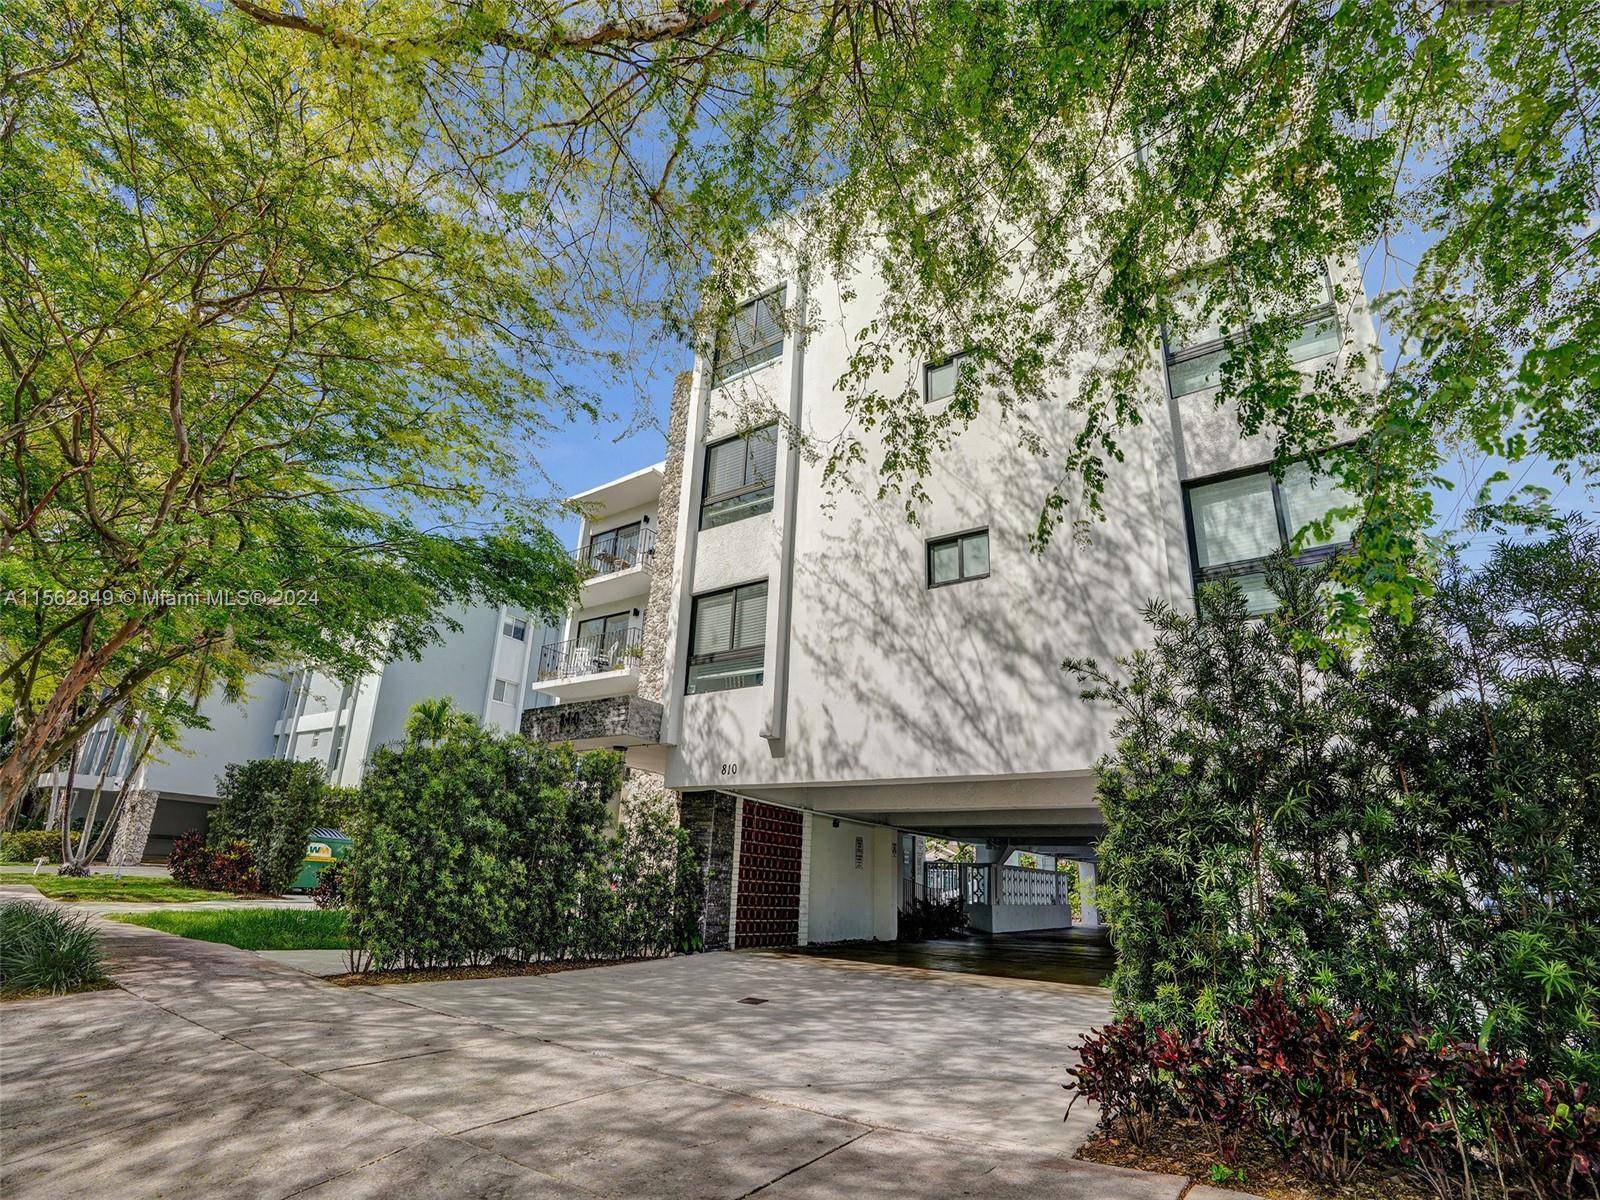 Secure a premium investment opportunity with this 15 unit multifamily building in the desirable Coral Gables area.